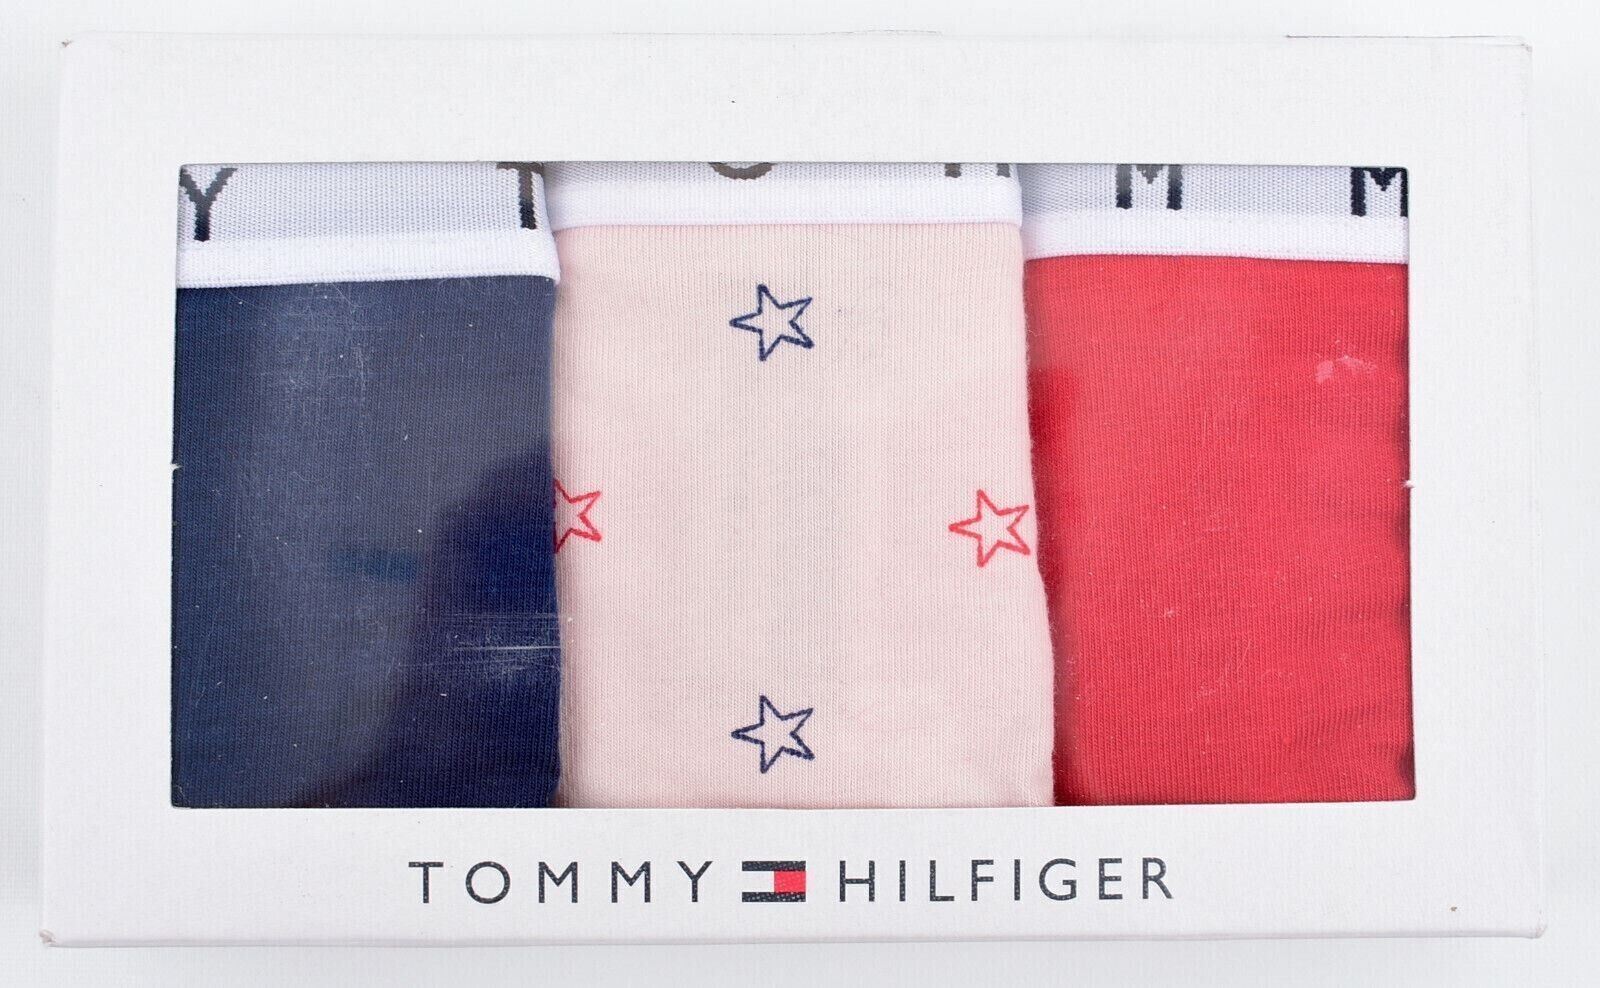 TOMMY HILFIGER Women's 3-pack Thongs Knickers Set, Navy/Pink/Red, size S /UK 10